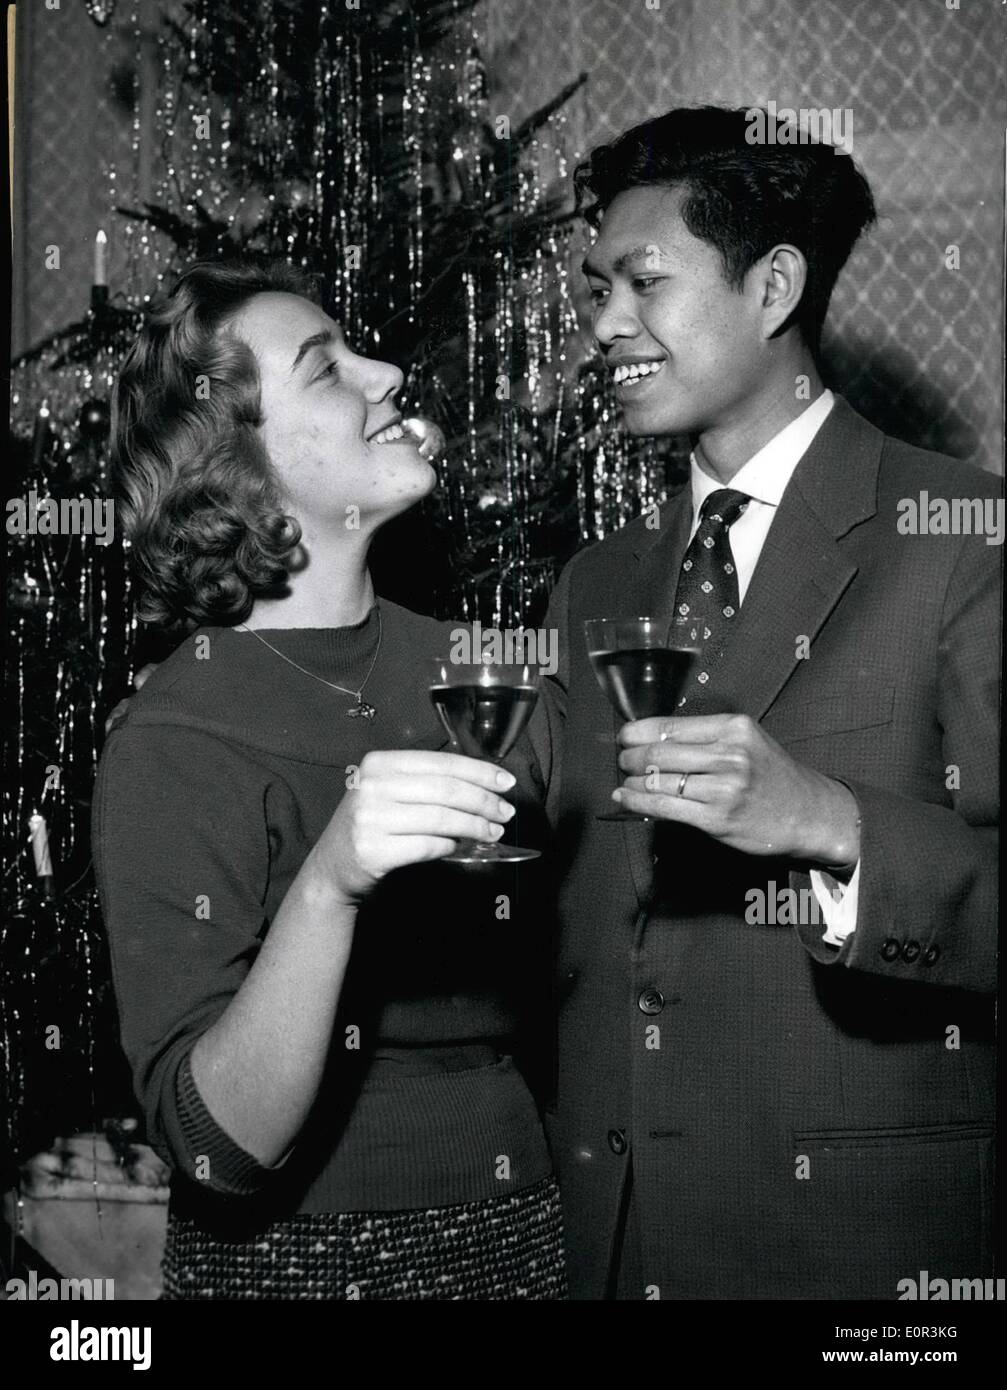 Jan. 01, 1958 - Berlin schoolgirl will become Bali-Princess: Under the Christmas tree the 18-year-old schoolgirl Hannelore Stuermer of Berlin-Reinicjendrof and Prince Udeyana Tisan of Puri-Singaradja/ Bali celebrated their engagement. They had met each-other for the first time an an International Jamboree during Easter in the Harz-mountains. A correspondence followed and a second meeting in summer during school-holidays. Last weekend they exchanged their engagement rings . Right now Hanelore is still going to school, but already in summer she will become Princess of Bali Stock Photo